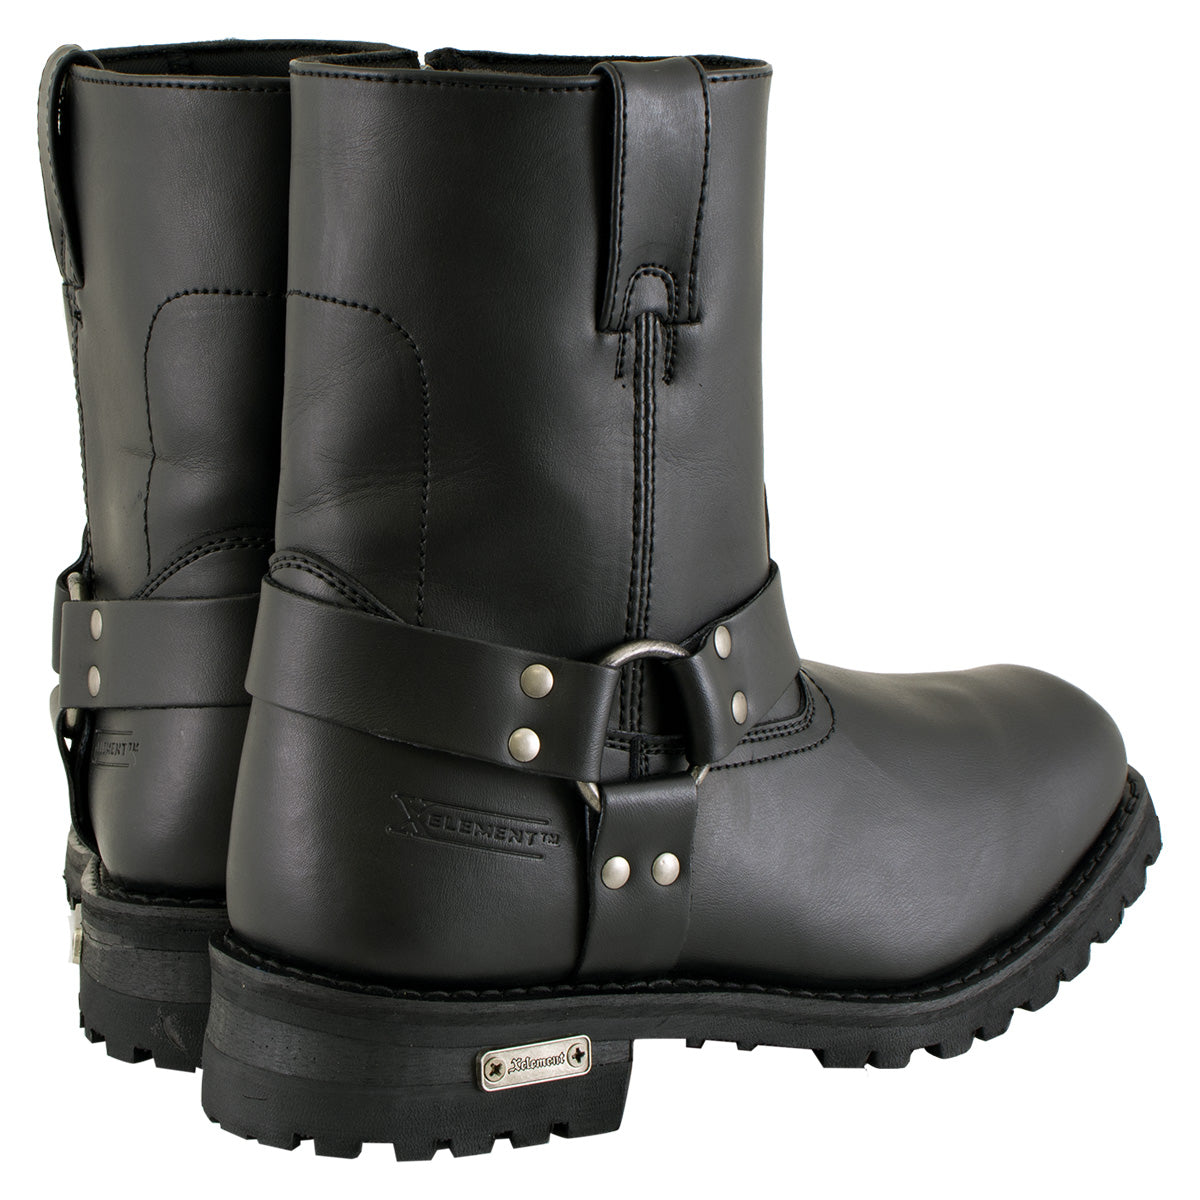 Xelement 1502 Men's 'Killa' Black Leather Zippered Harness Motorcycle Boots